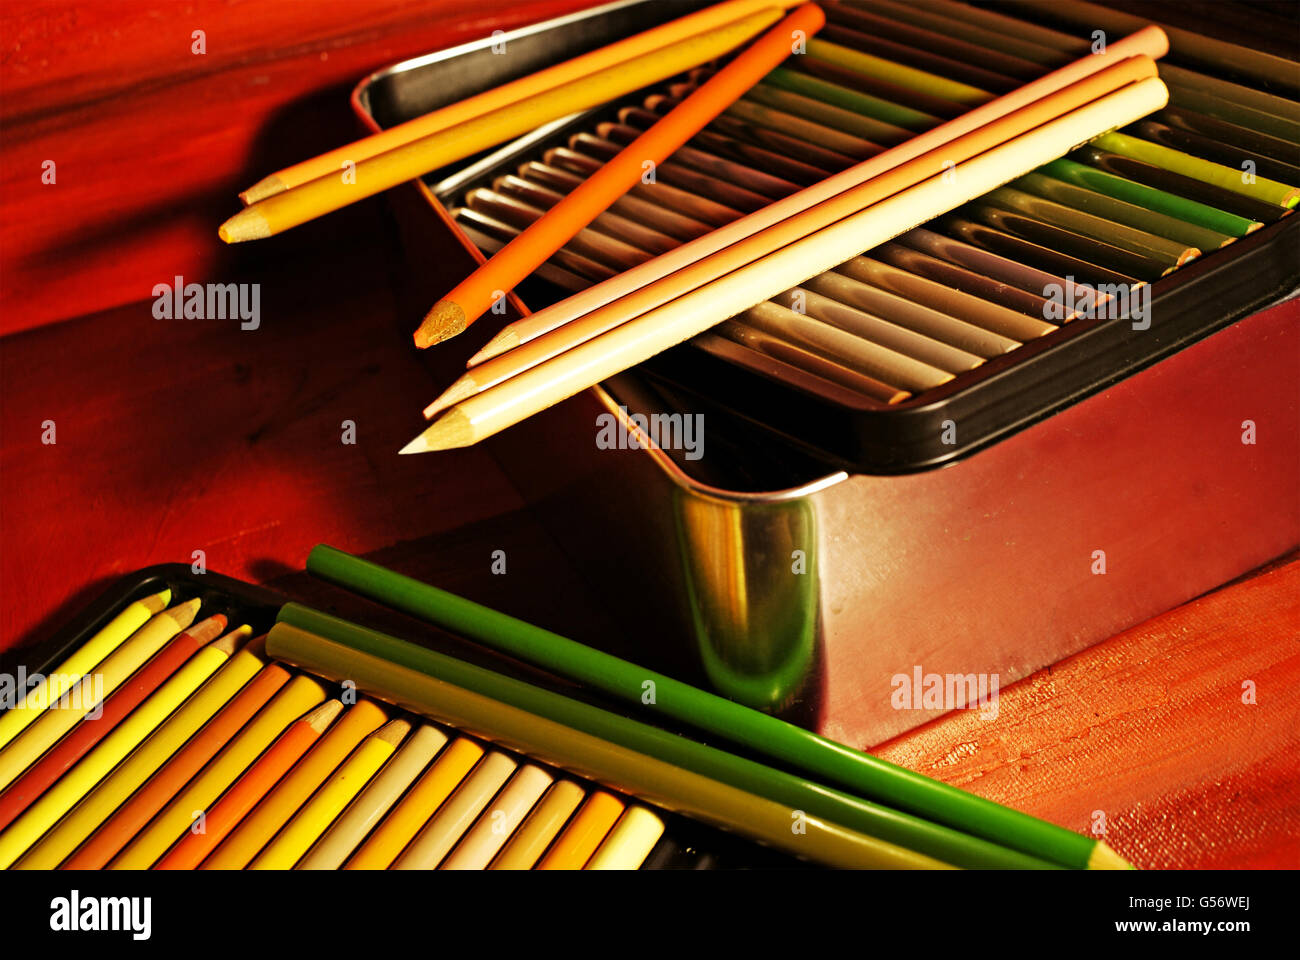 Photograph of a box of wood color pencils Stock Photo